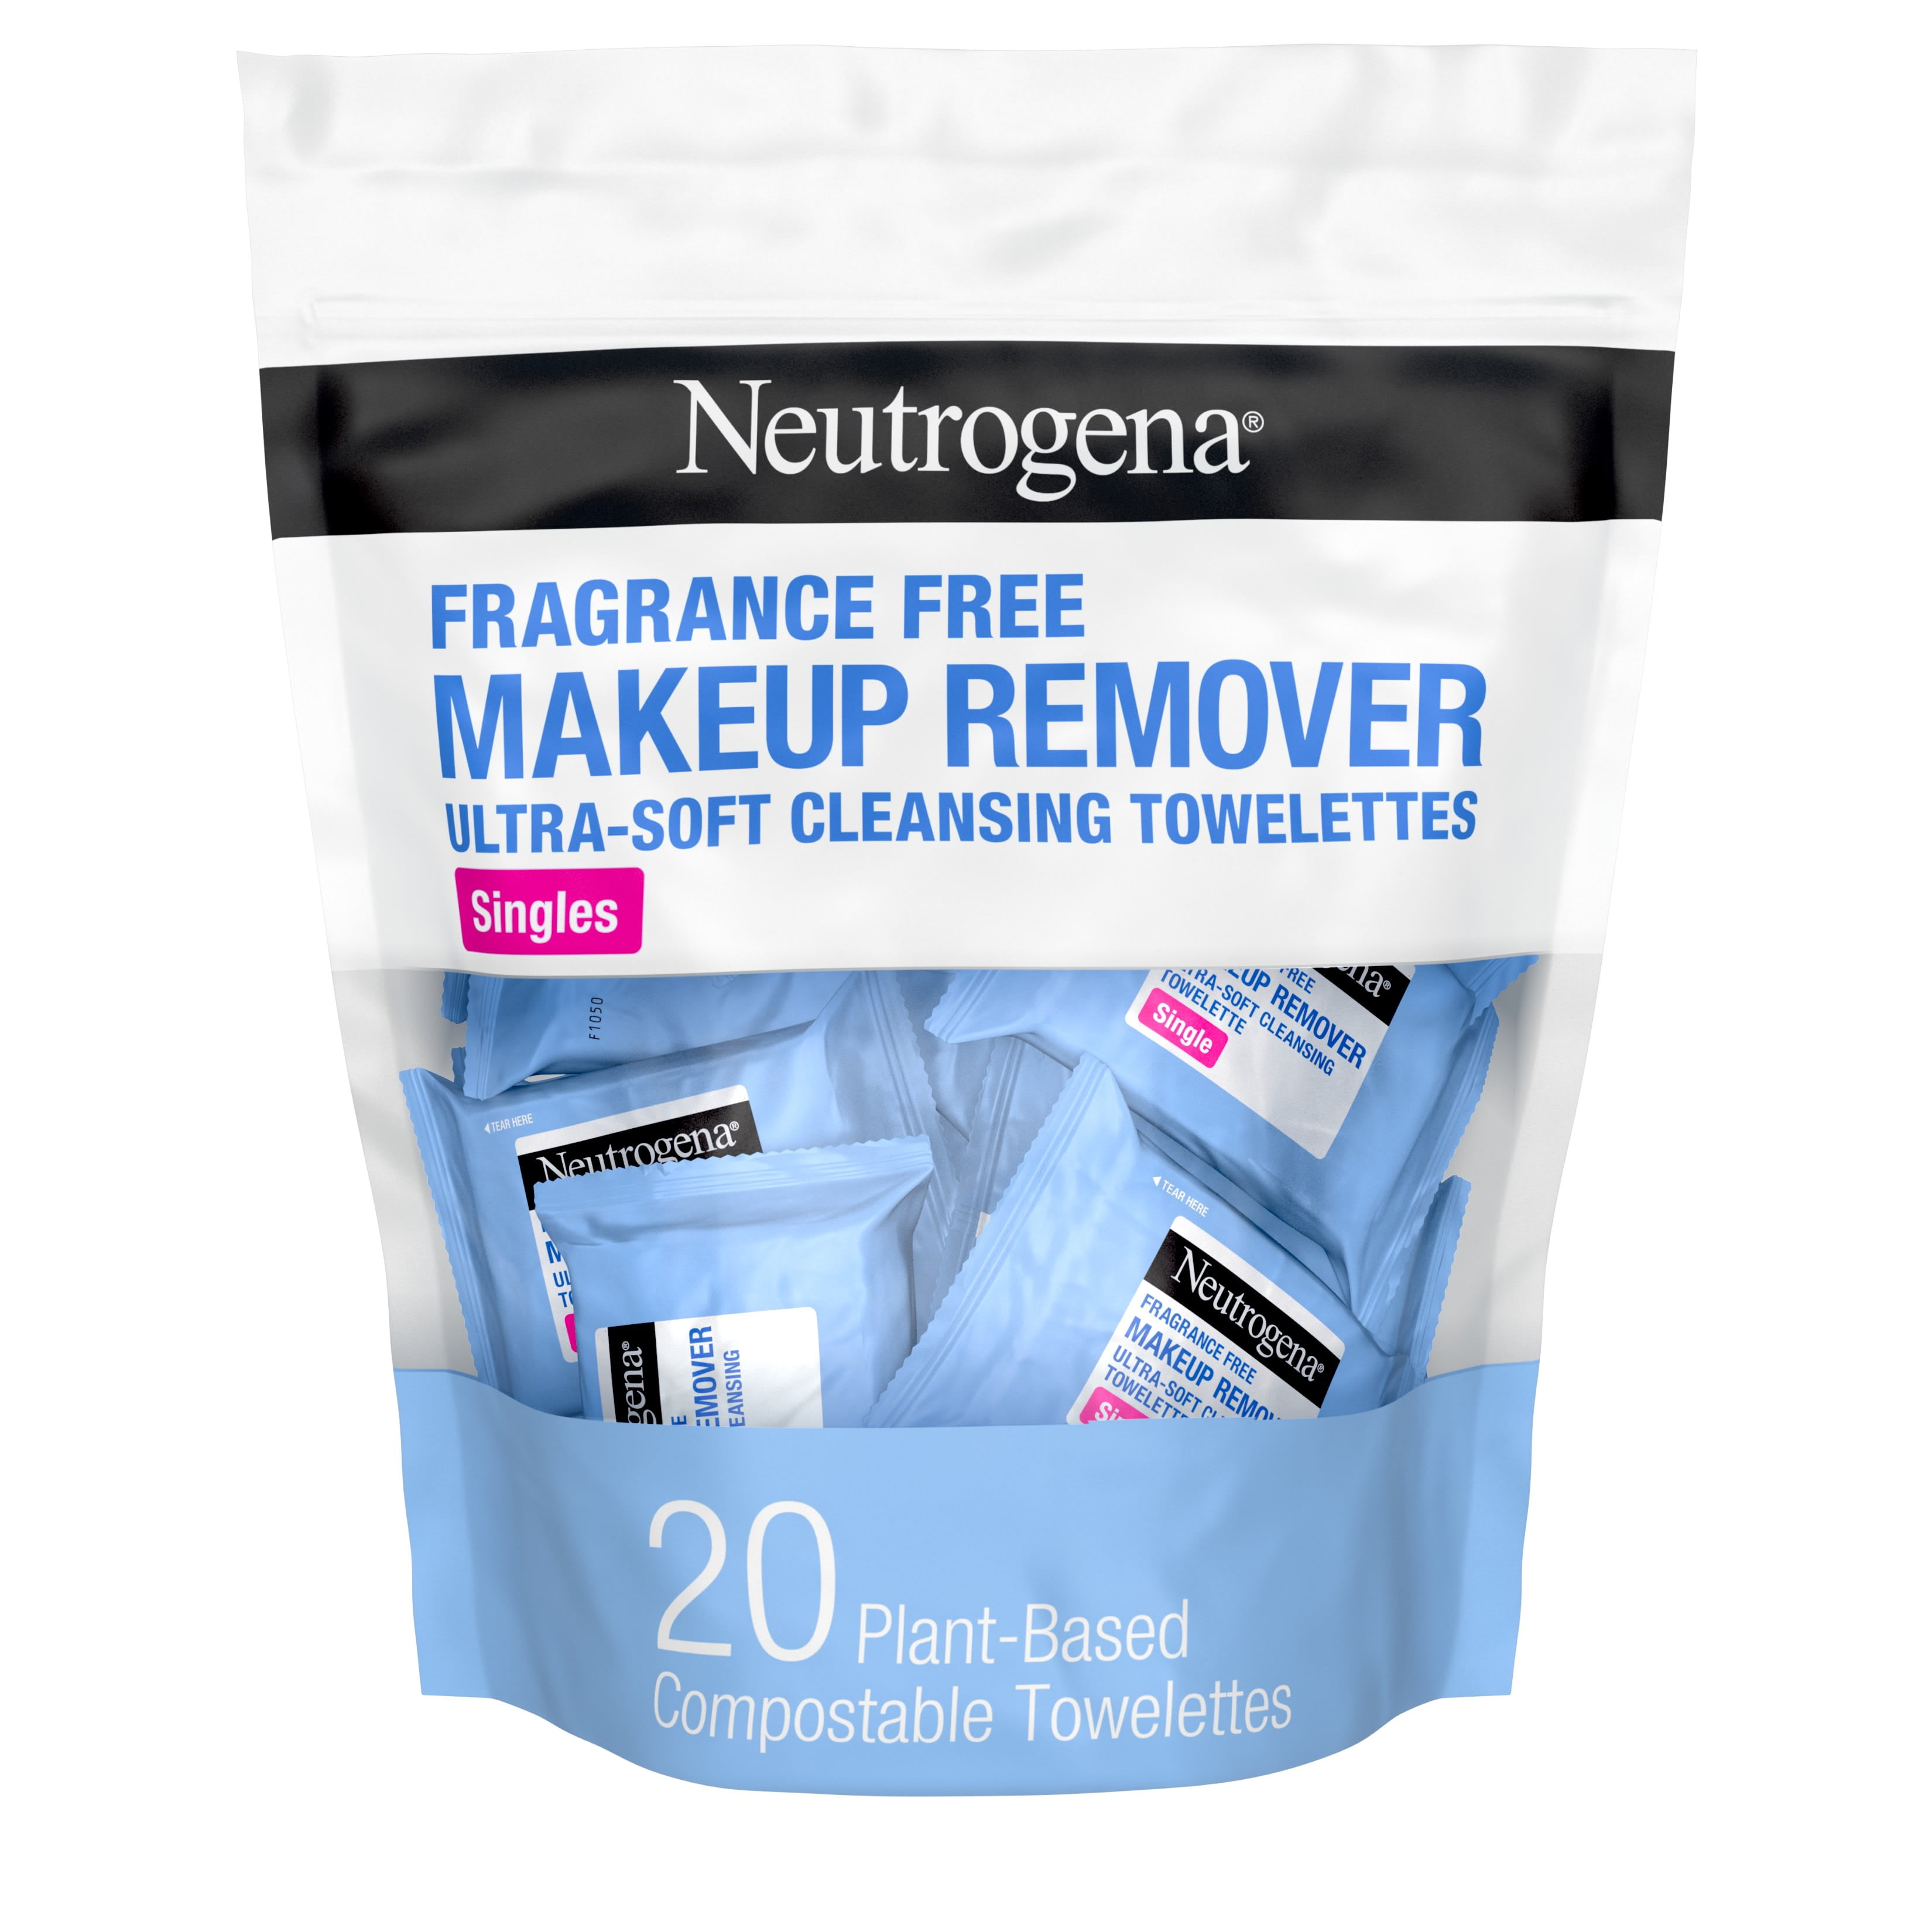 Neutrogena Fragrance-Free Makeup Remover Face Wipe Singles, 20 ct